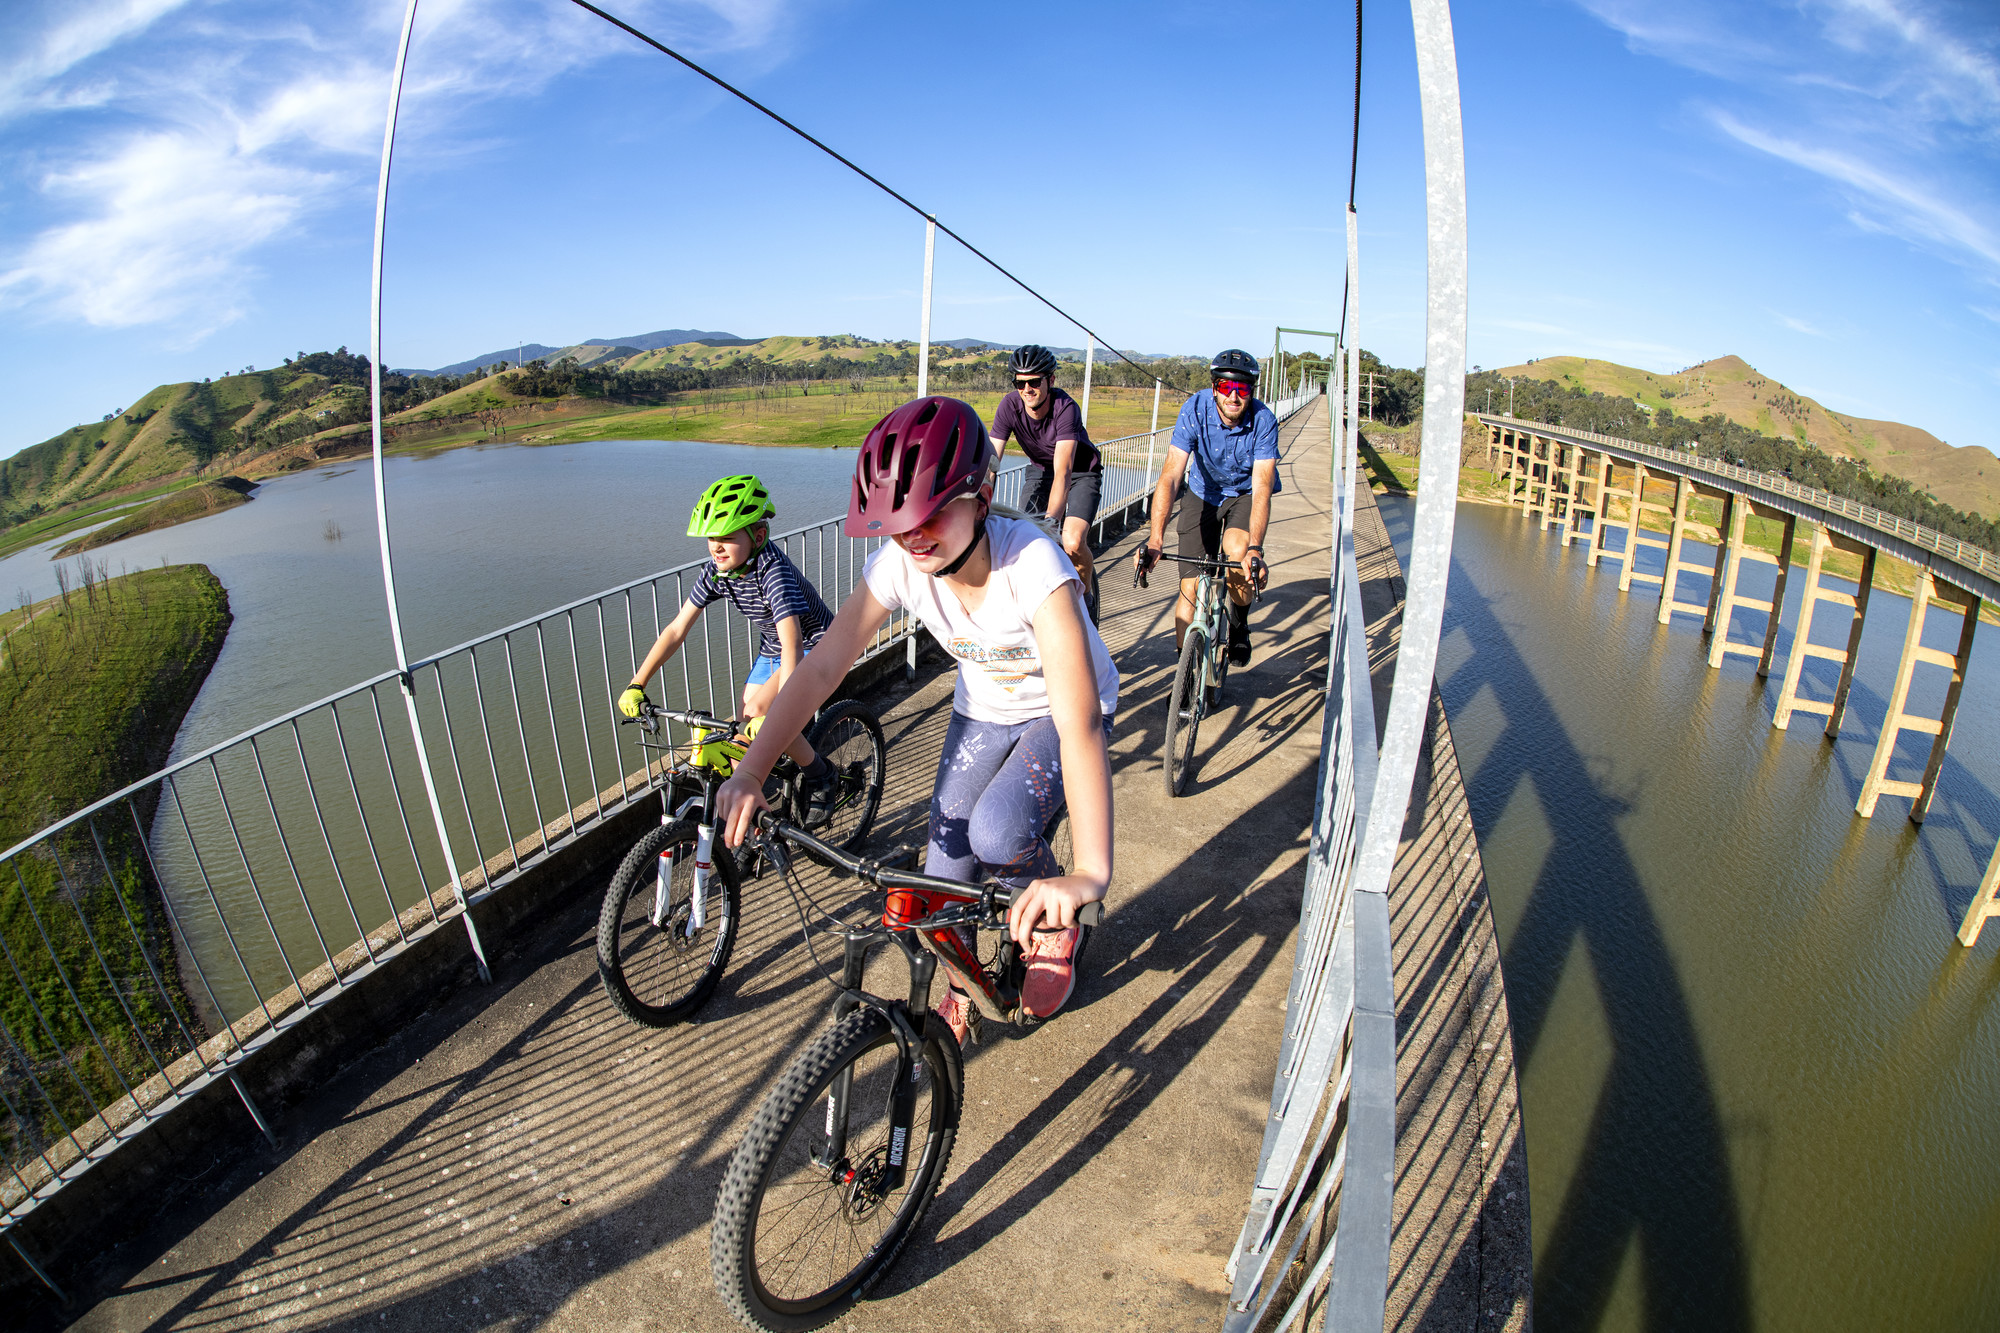 A family of cyclists riding across the Bonnie Doon Bridge on the Great Victorian Rail Trail